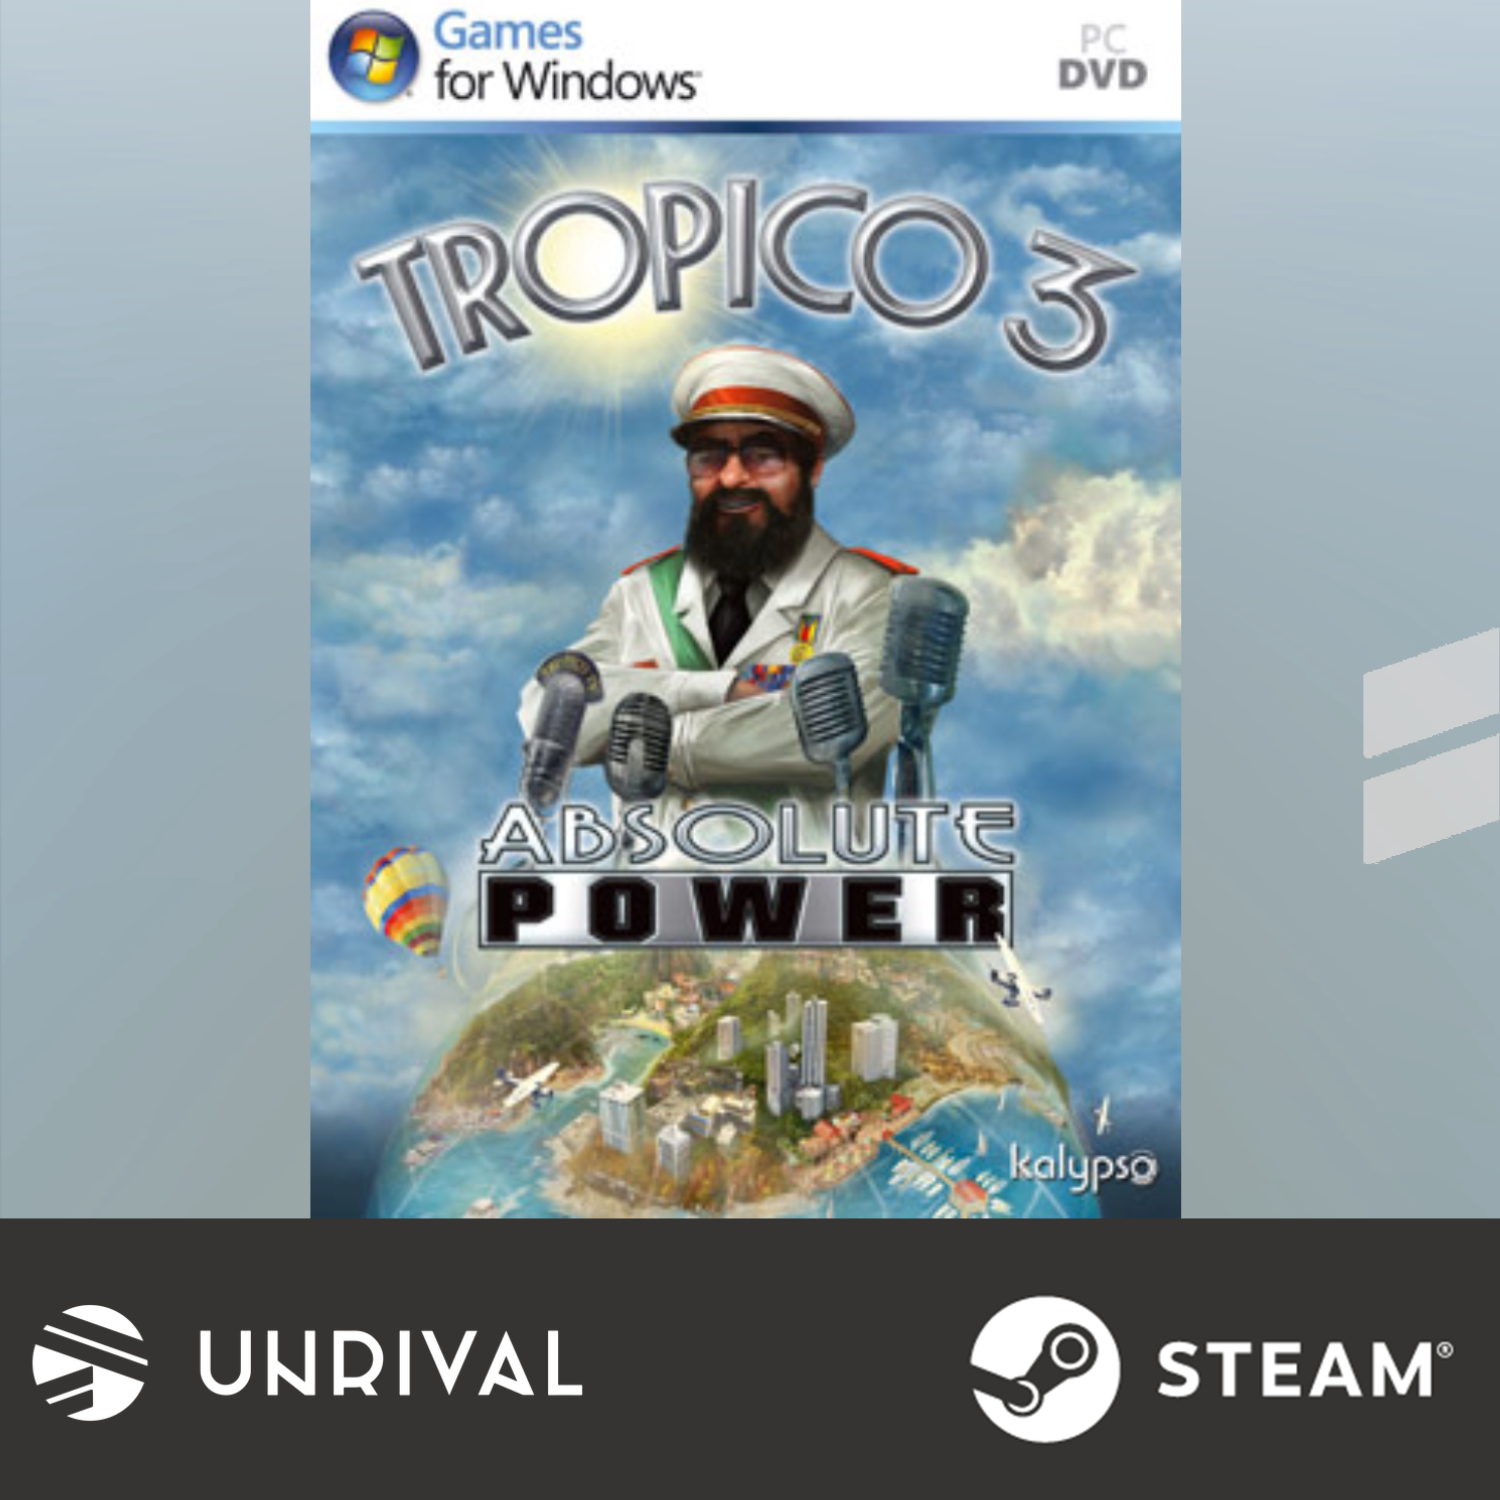 Tropico 3 : Absolute Power PC Digital Download Game (Single Player) - Unrival